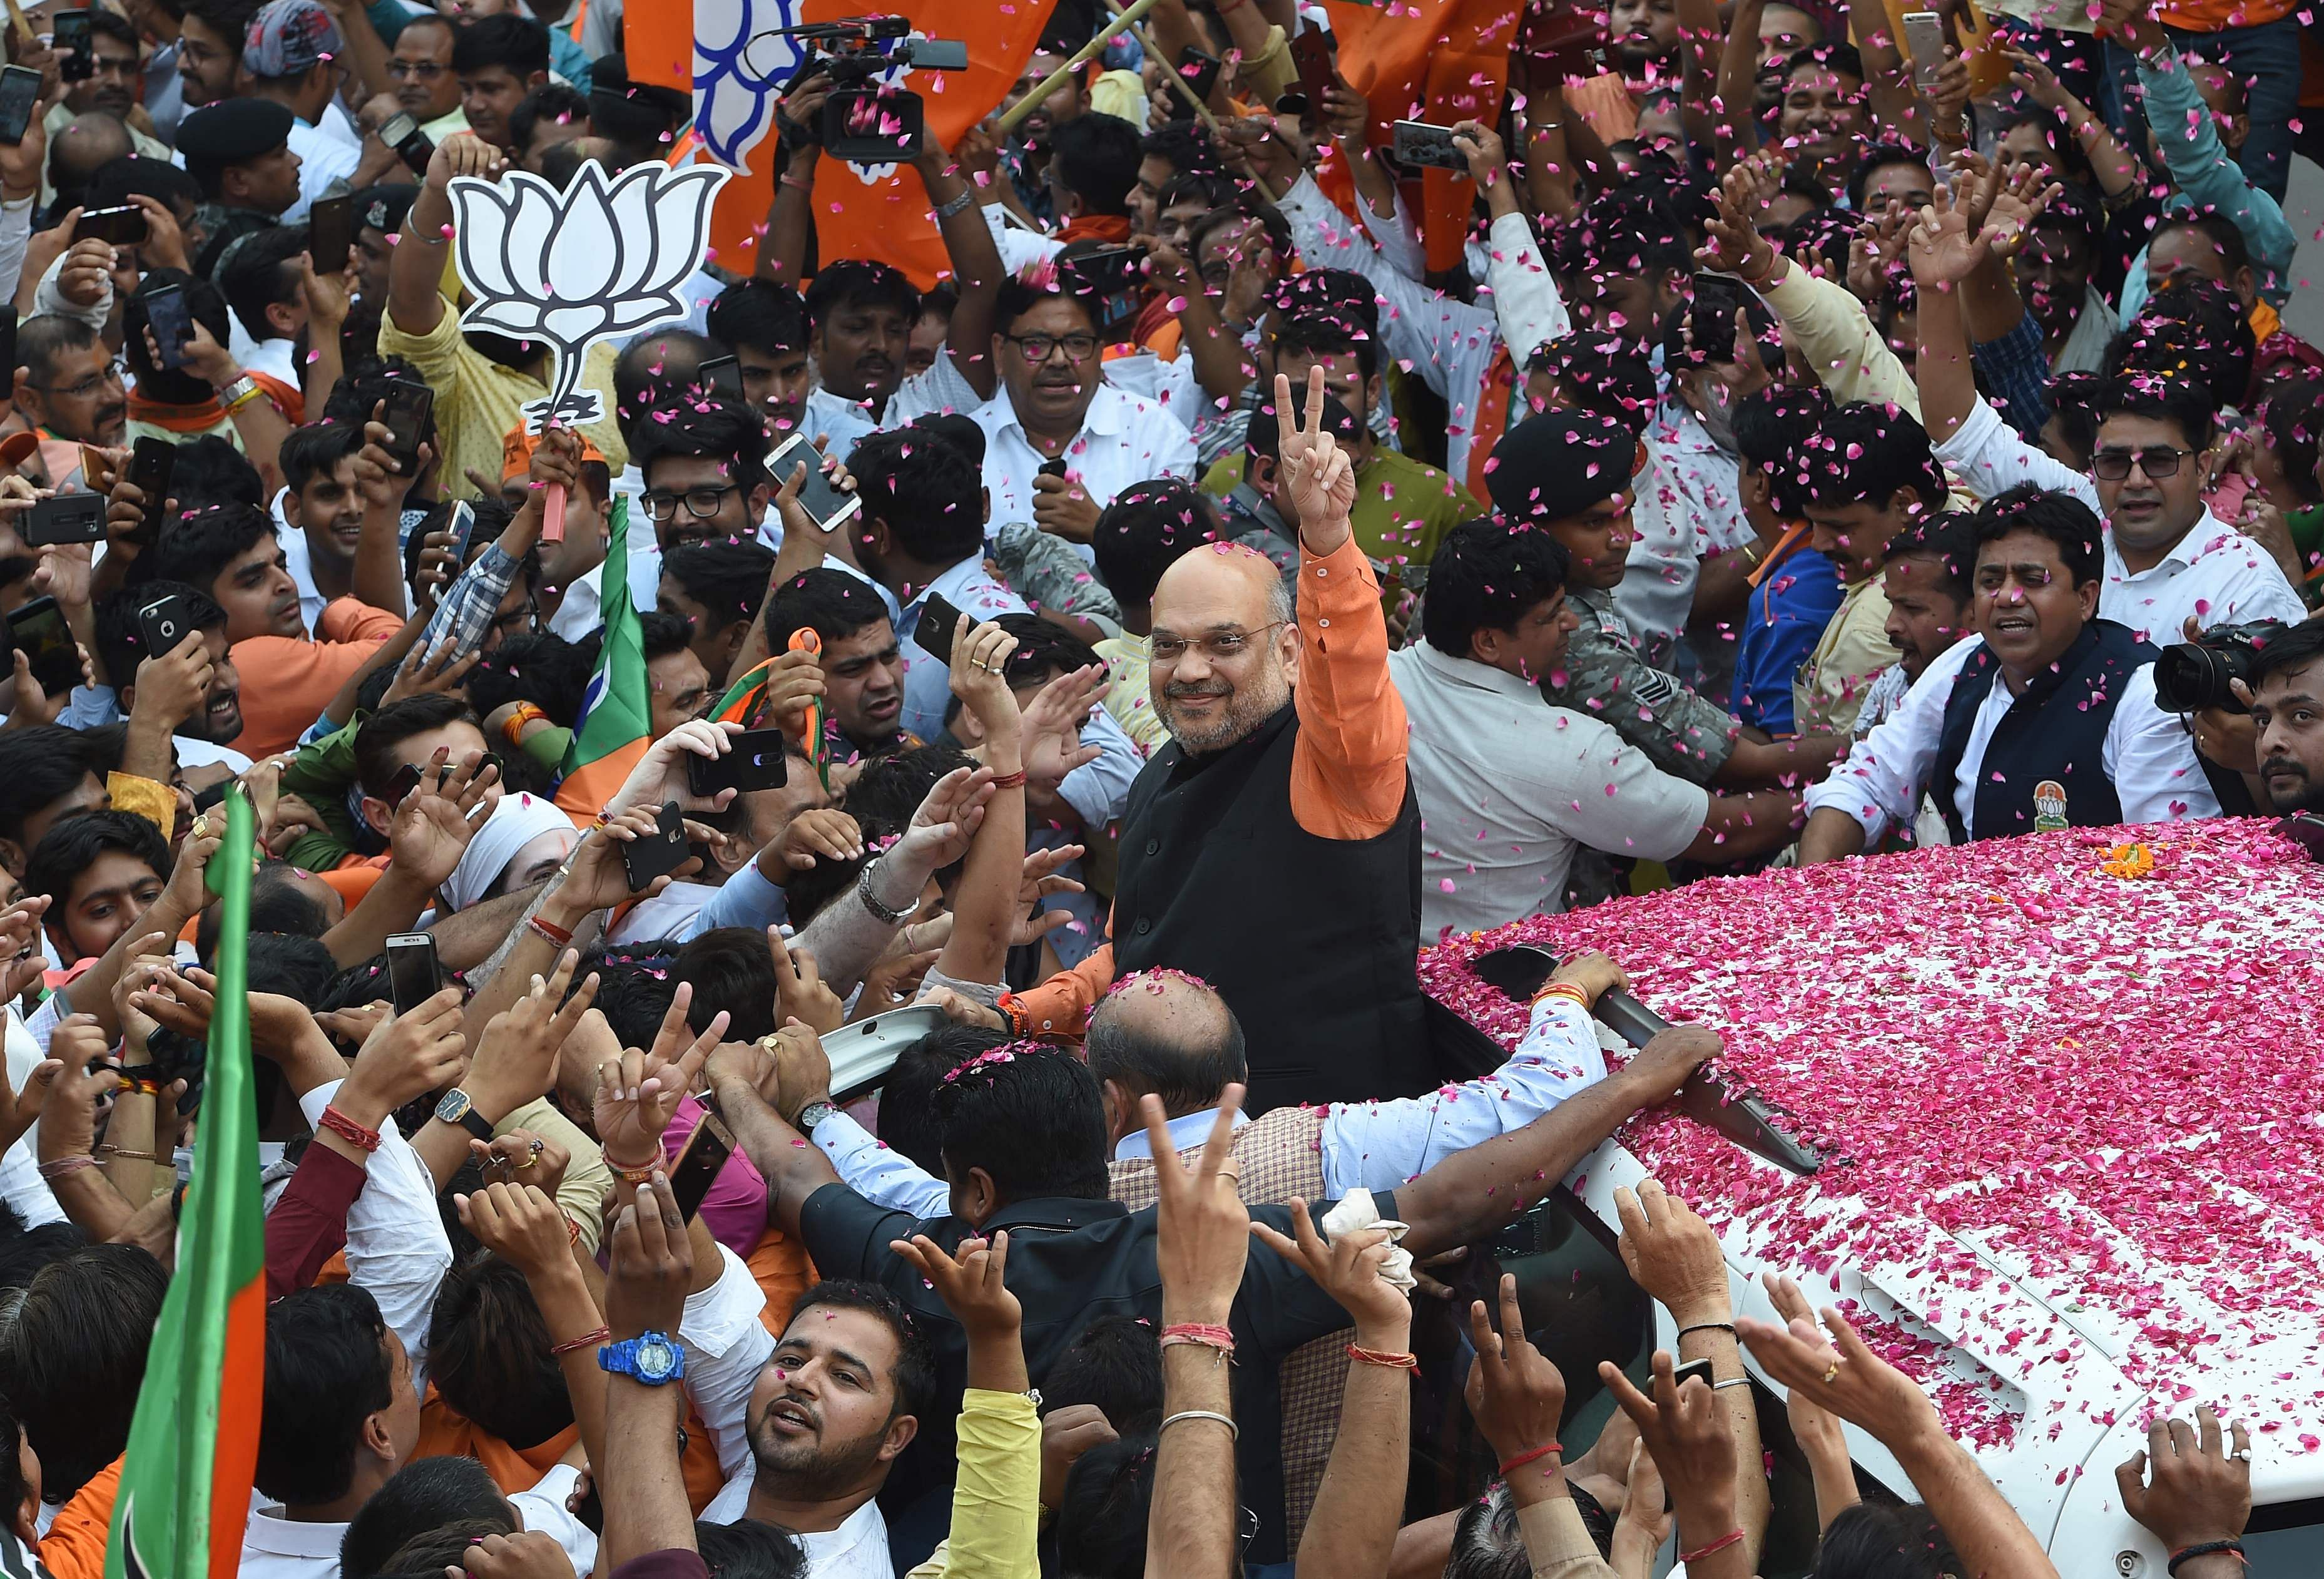 Amit Shah (C), president of the ruling Bharatiya Janata Party (BJP), gestures to supporters during victory celebrations in the Indian national elections in New Delhi on May 23, 2019. - India's Prime Minister Narendra Modi claimed victory May 23 in the country's elections, promising an "inclusive" future after his Hindu nationalist party appeared headed for a landslide win. (Photo by AFP)